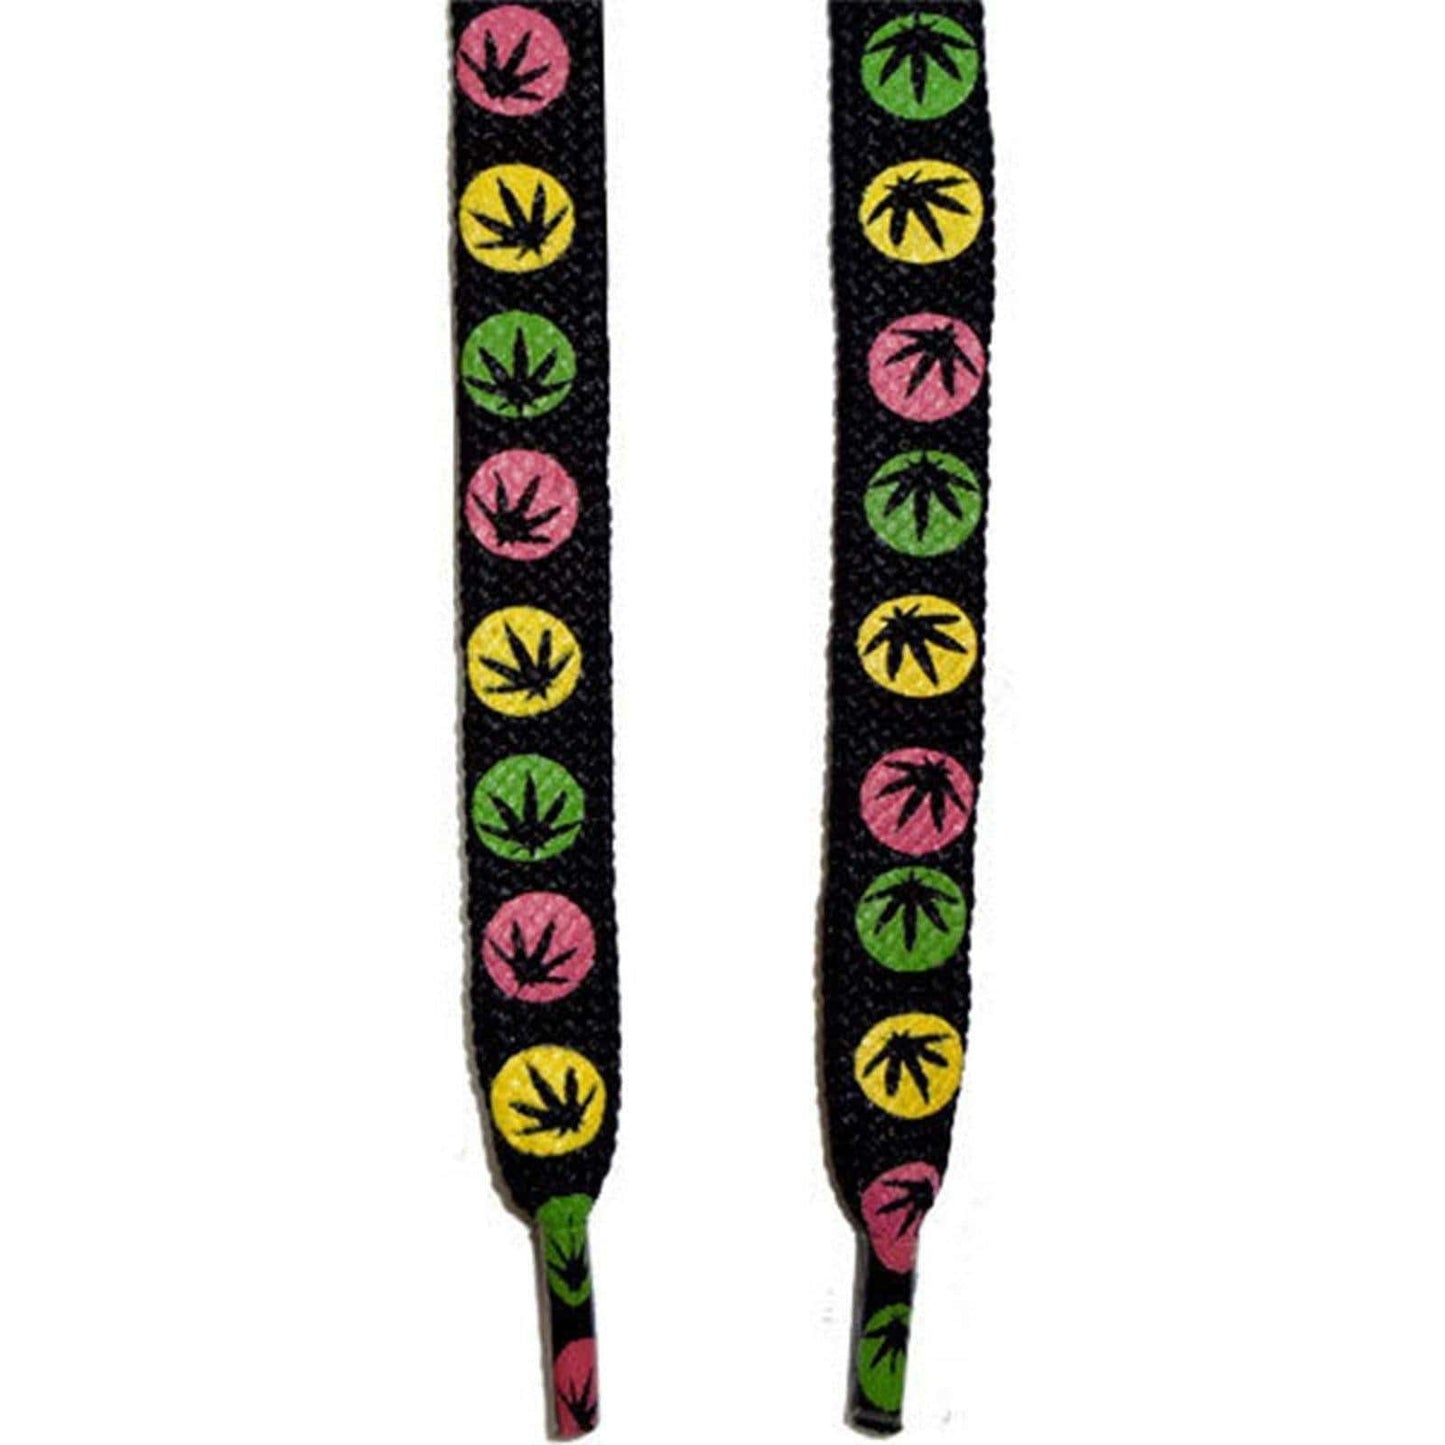 Black Cannabis Leaf Rasta Shoe Laces for Mens Womens Run Trainers Boots Sneakers